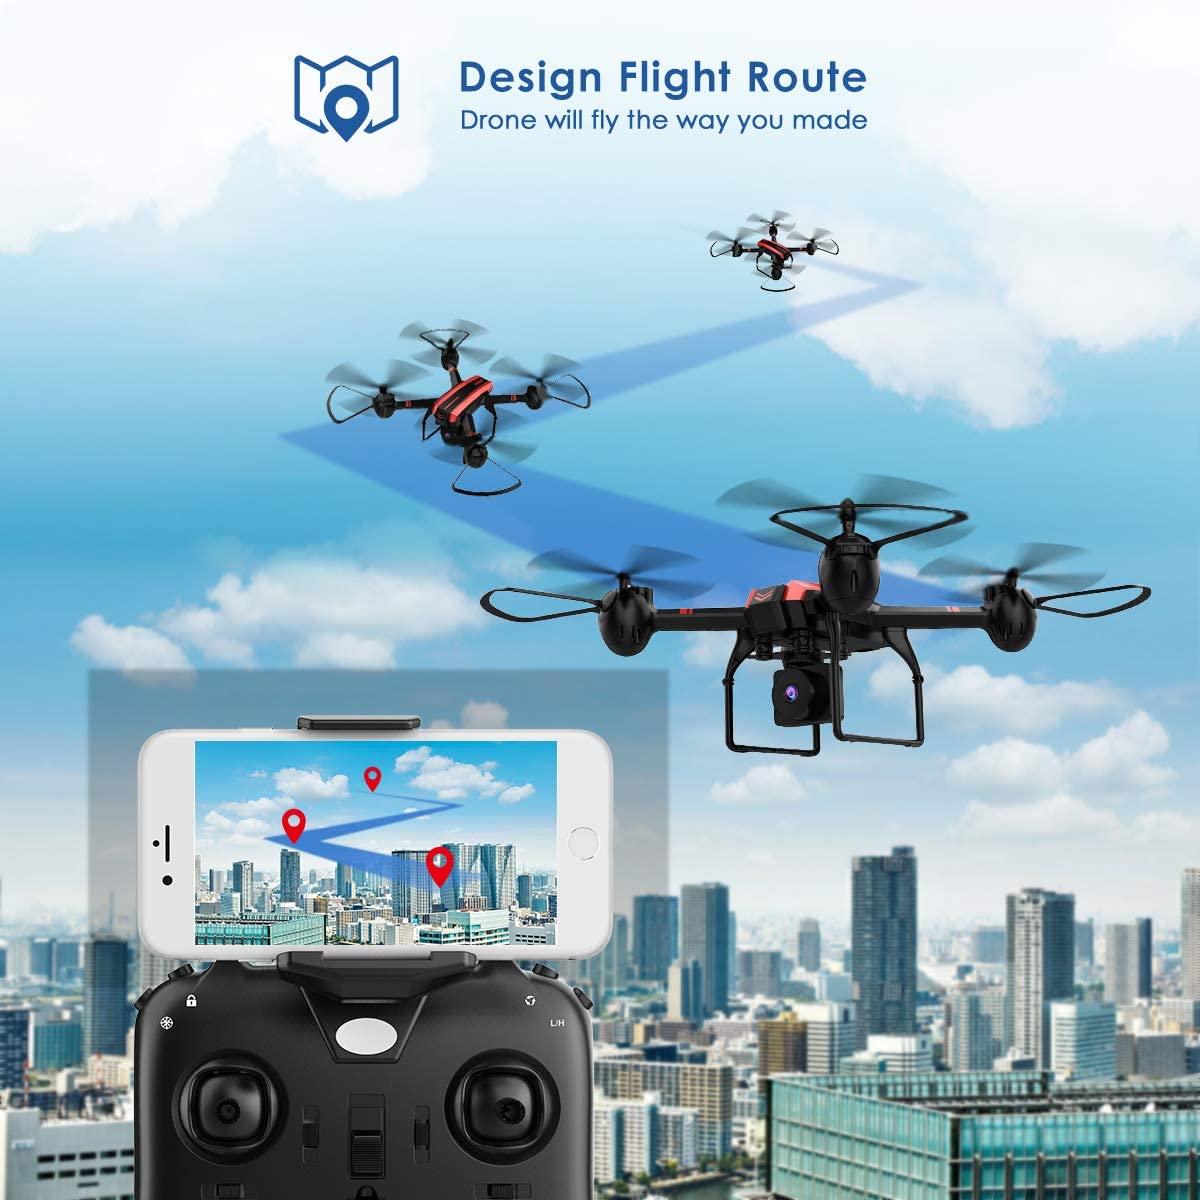 SANROCK X105W Drone - for Adults And Kids, 1080P HD Camera RC Quadcopter for Beginners, Wifi Live Video Cam, App Control, Altitude Hold, Headless Mode, Trajectory Flight, Gravity Sensor, 3D Flip - RCDrone